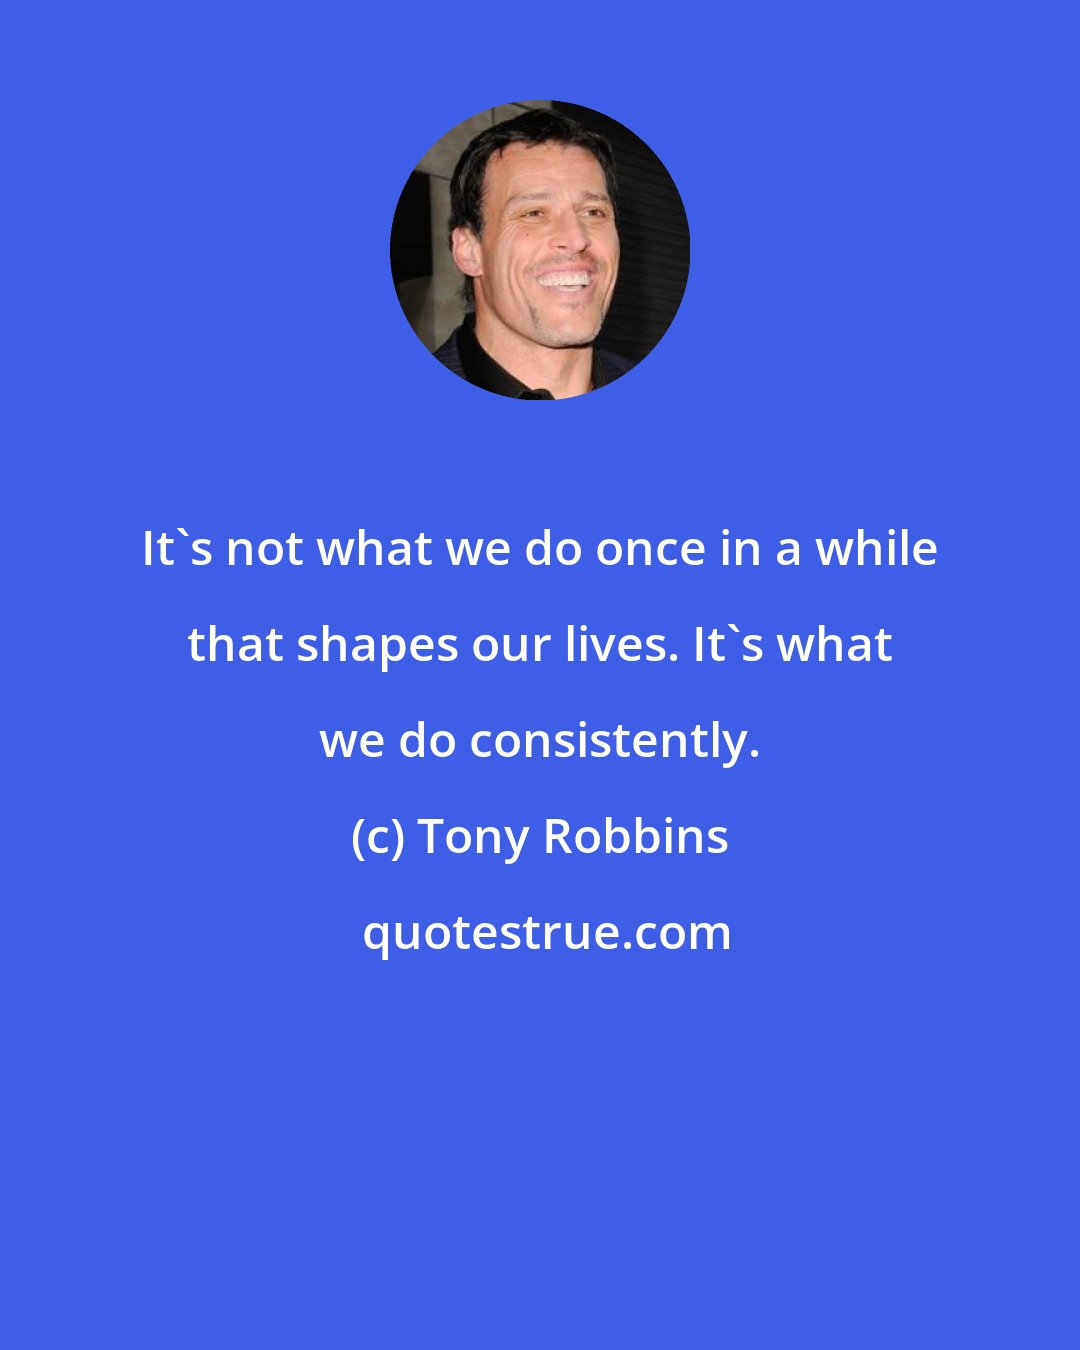 Tony Robbins: It's not what we do once in a while that shapes our lives. It's what we do consistently.